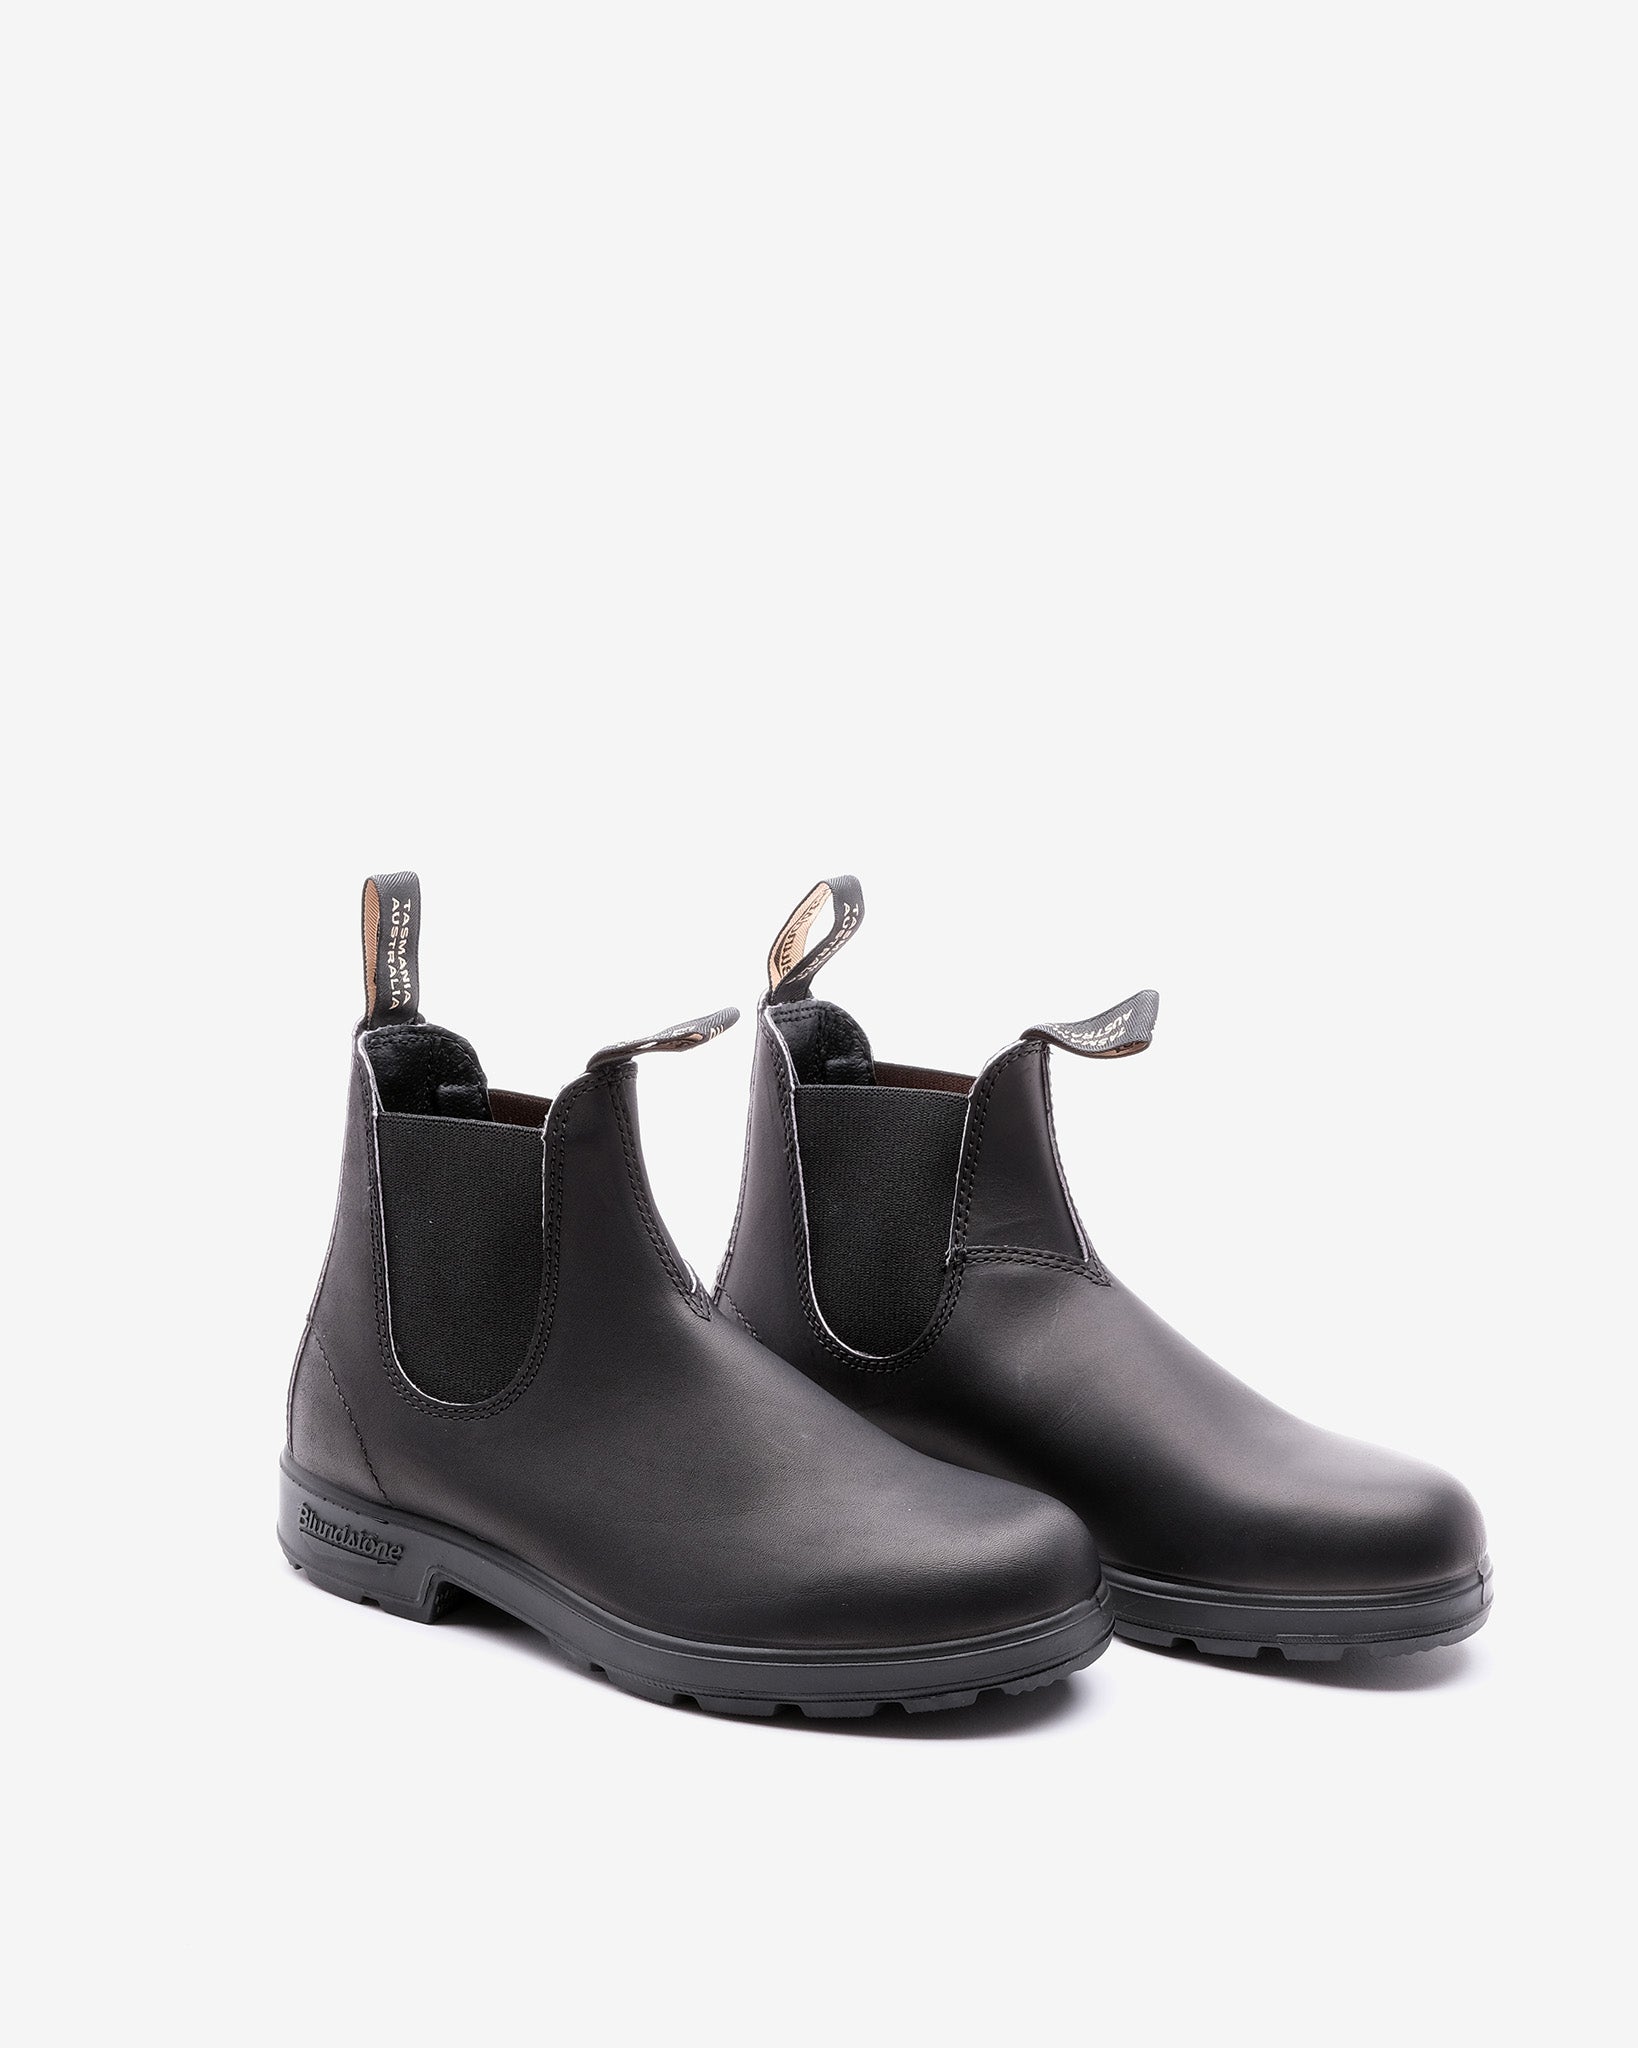 510 Black Leather Boots